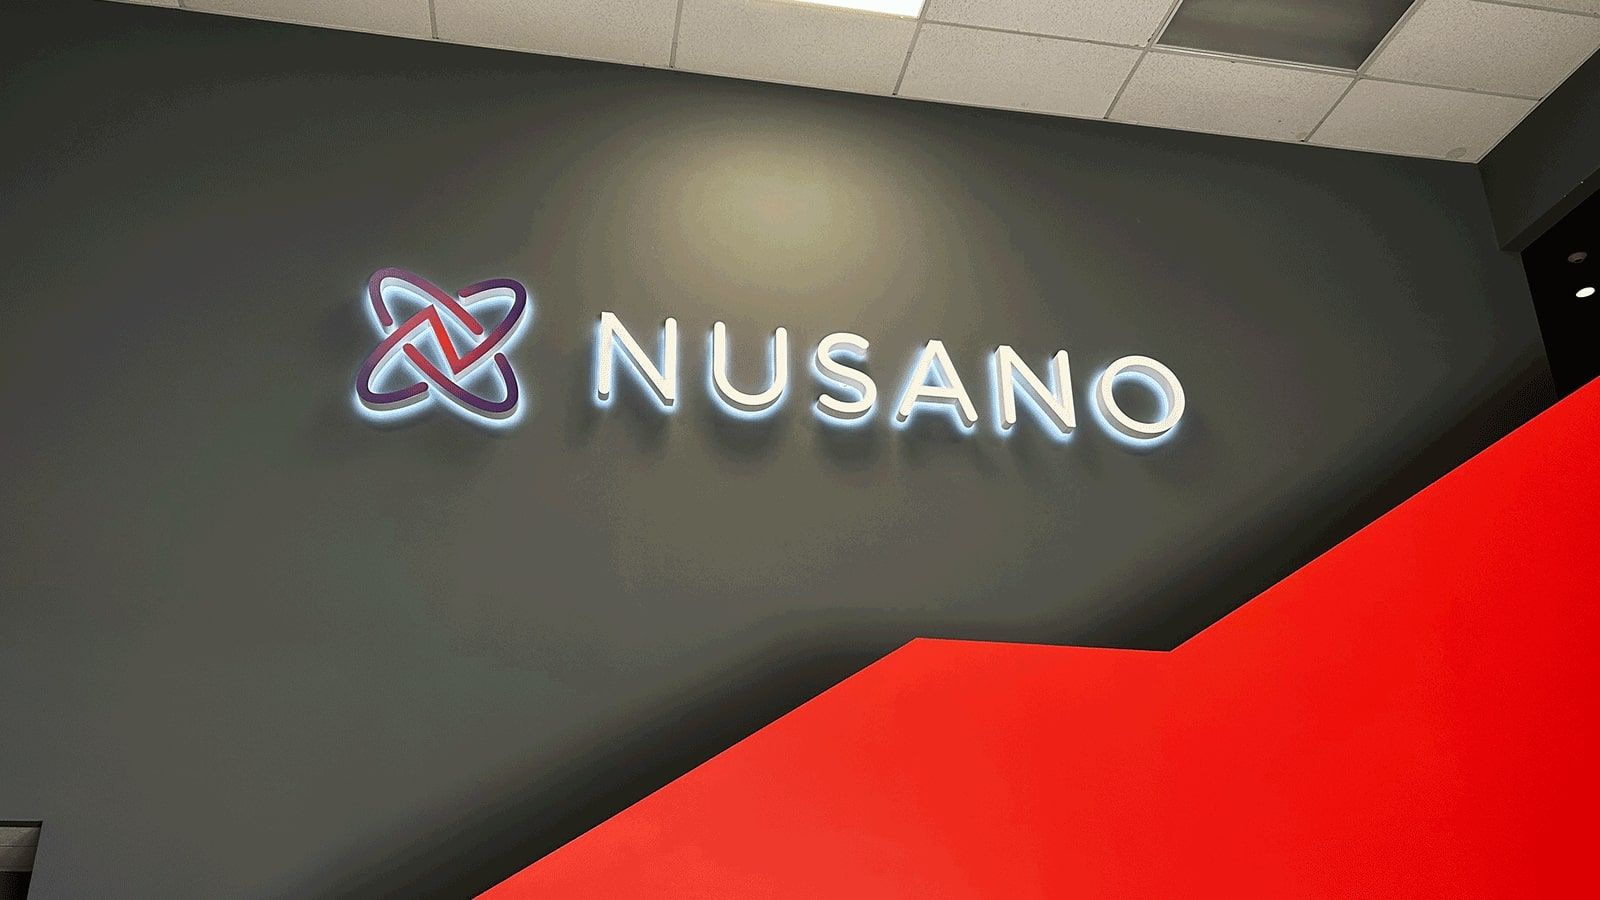 Nusano reverse channel letters attached to the wall